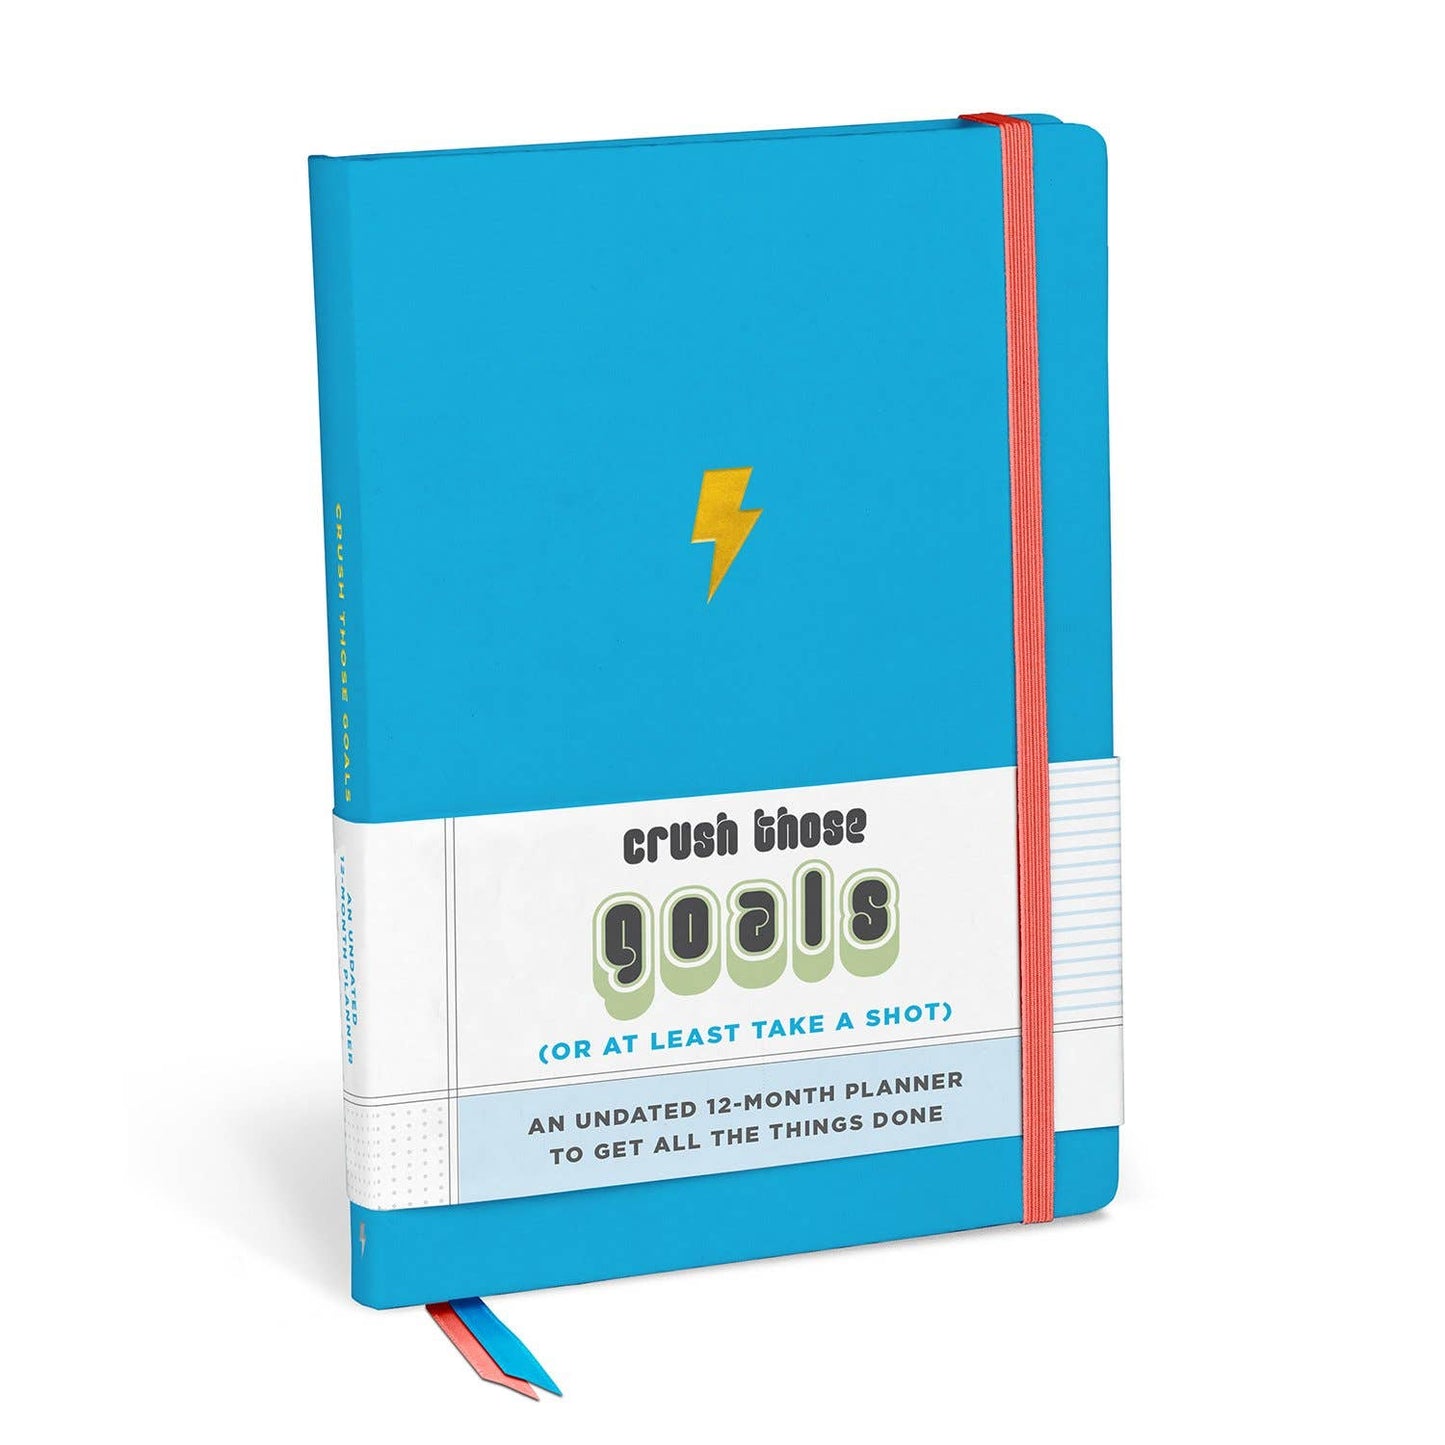 Crush Those Goals Large Hardcover Planner